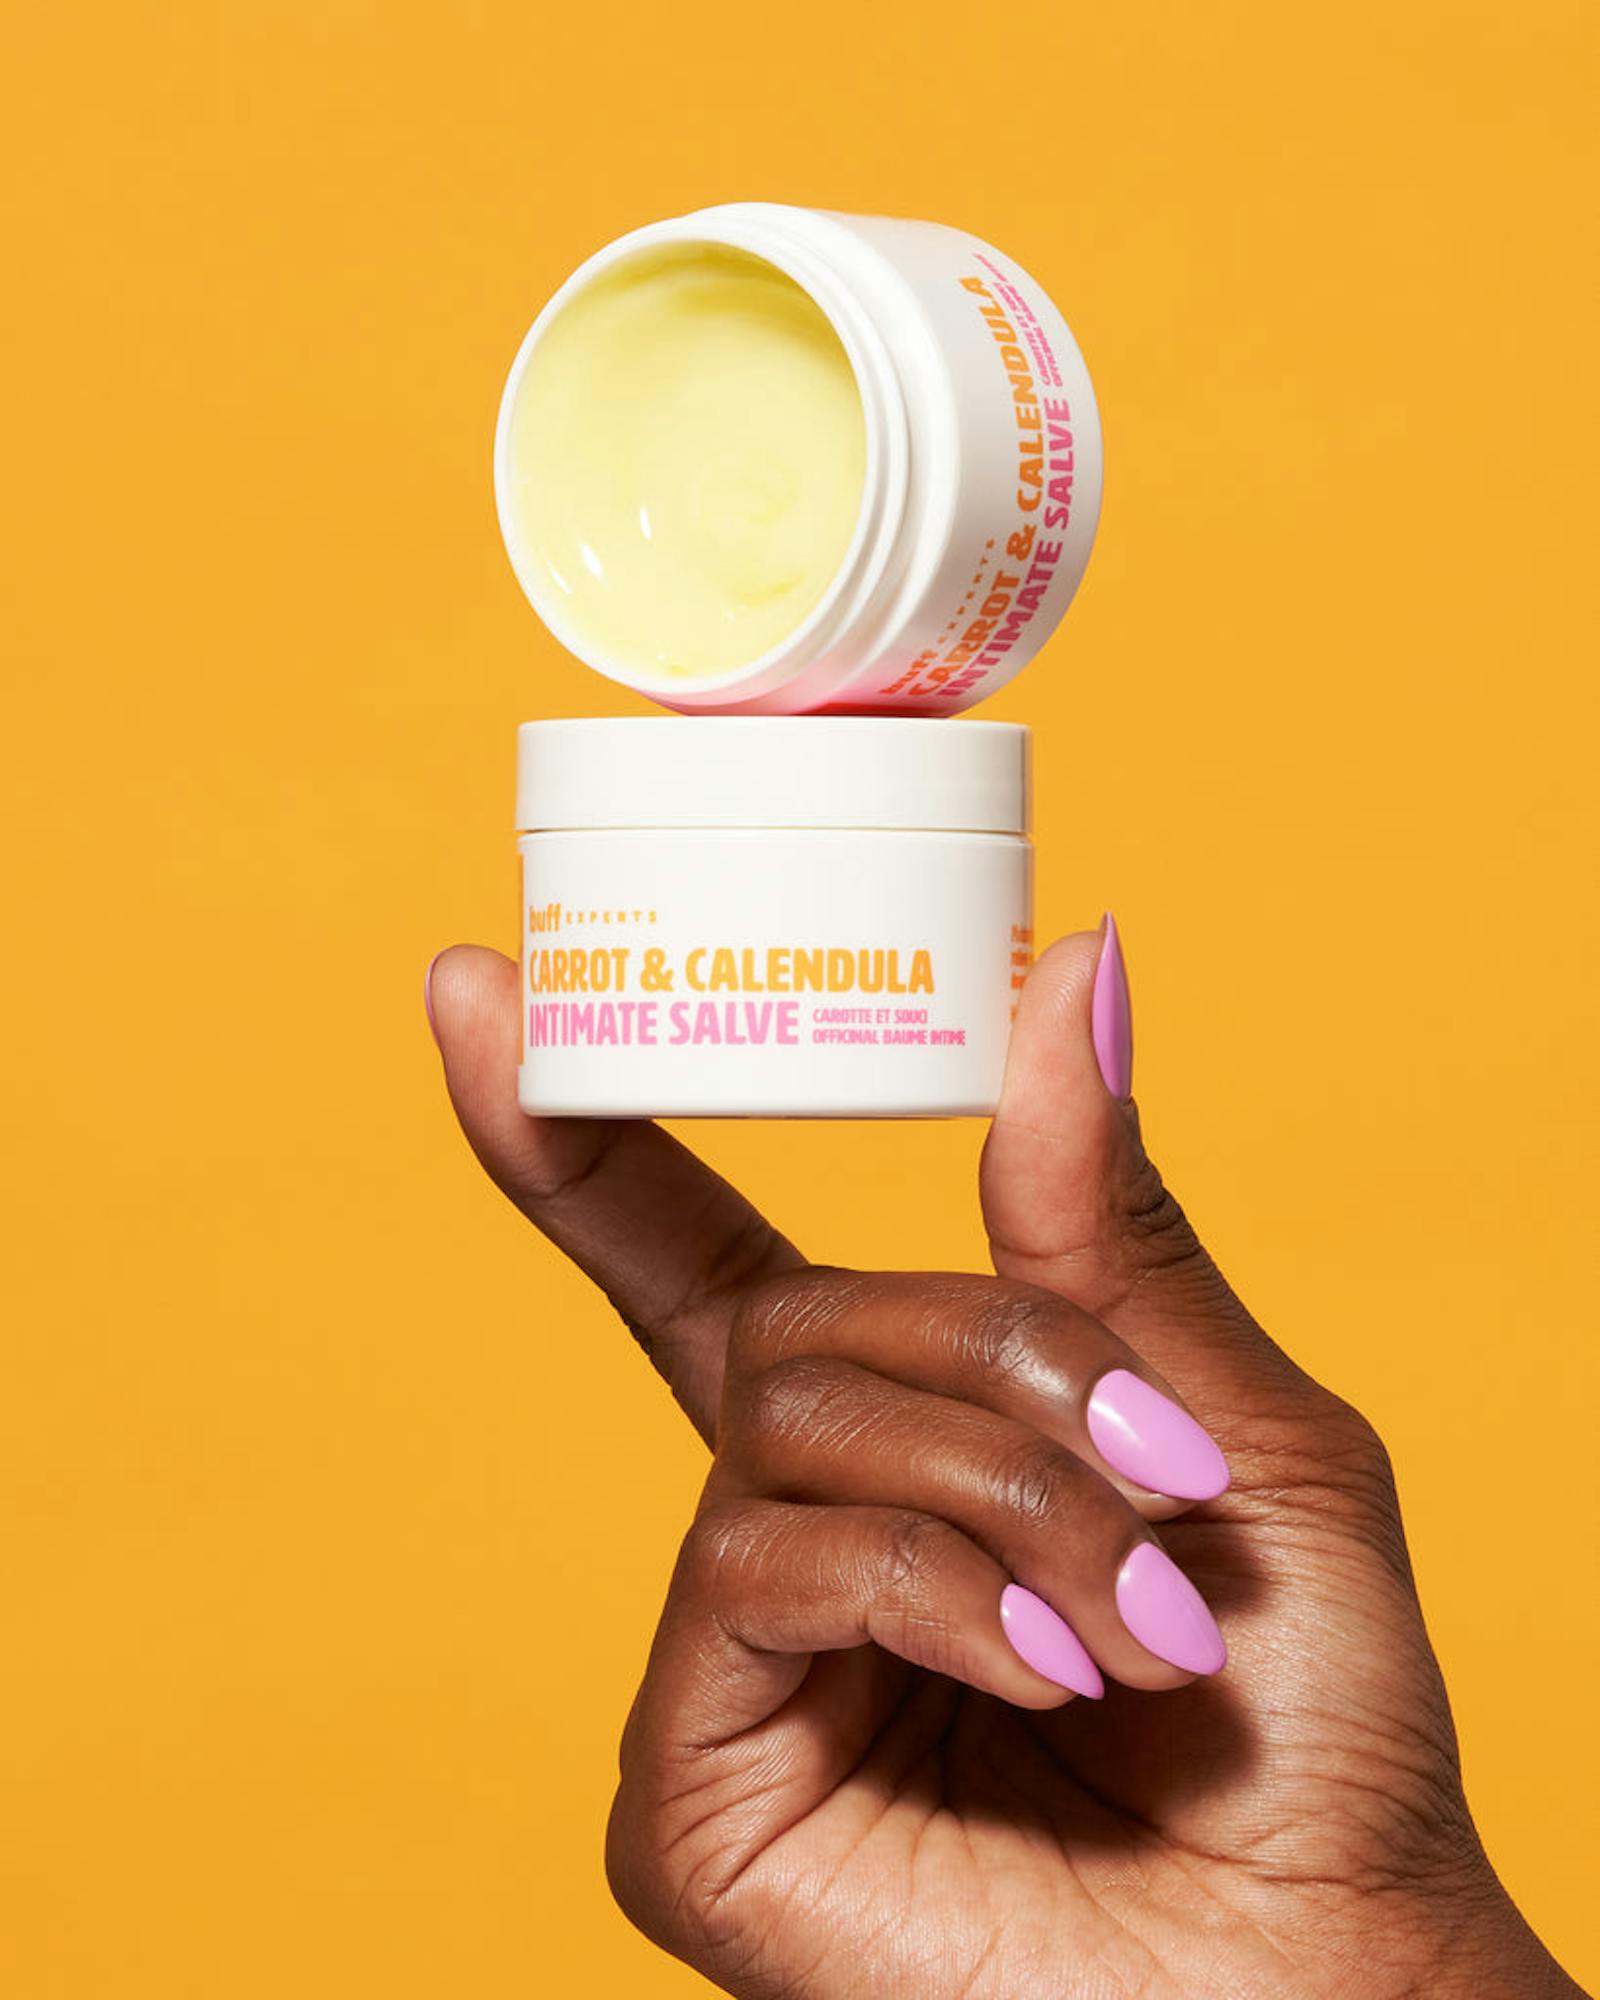 5 Black-Owned Bath and Body Brands You Should Know